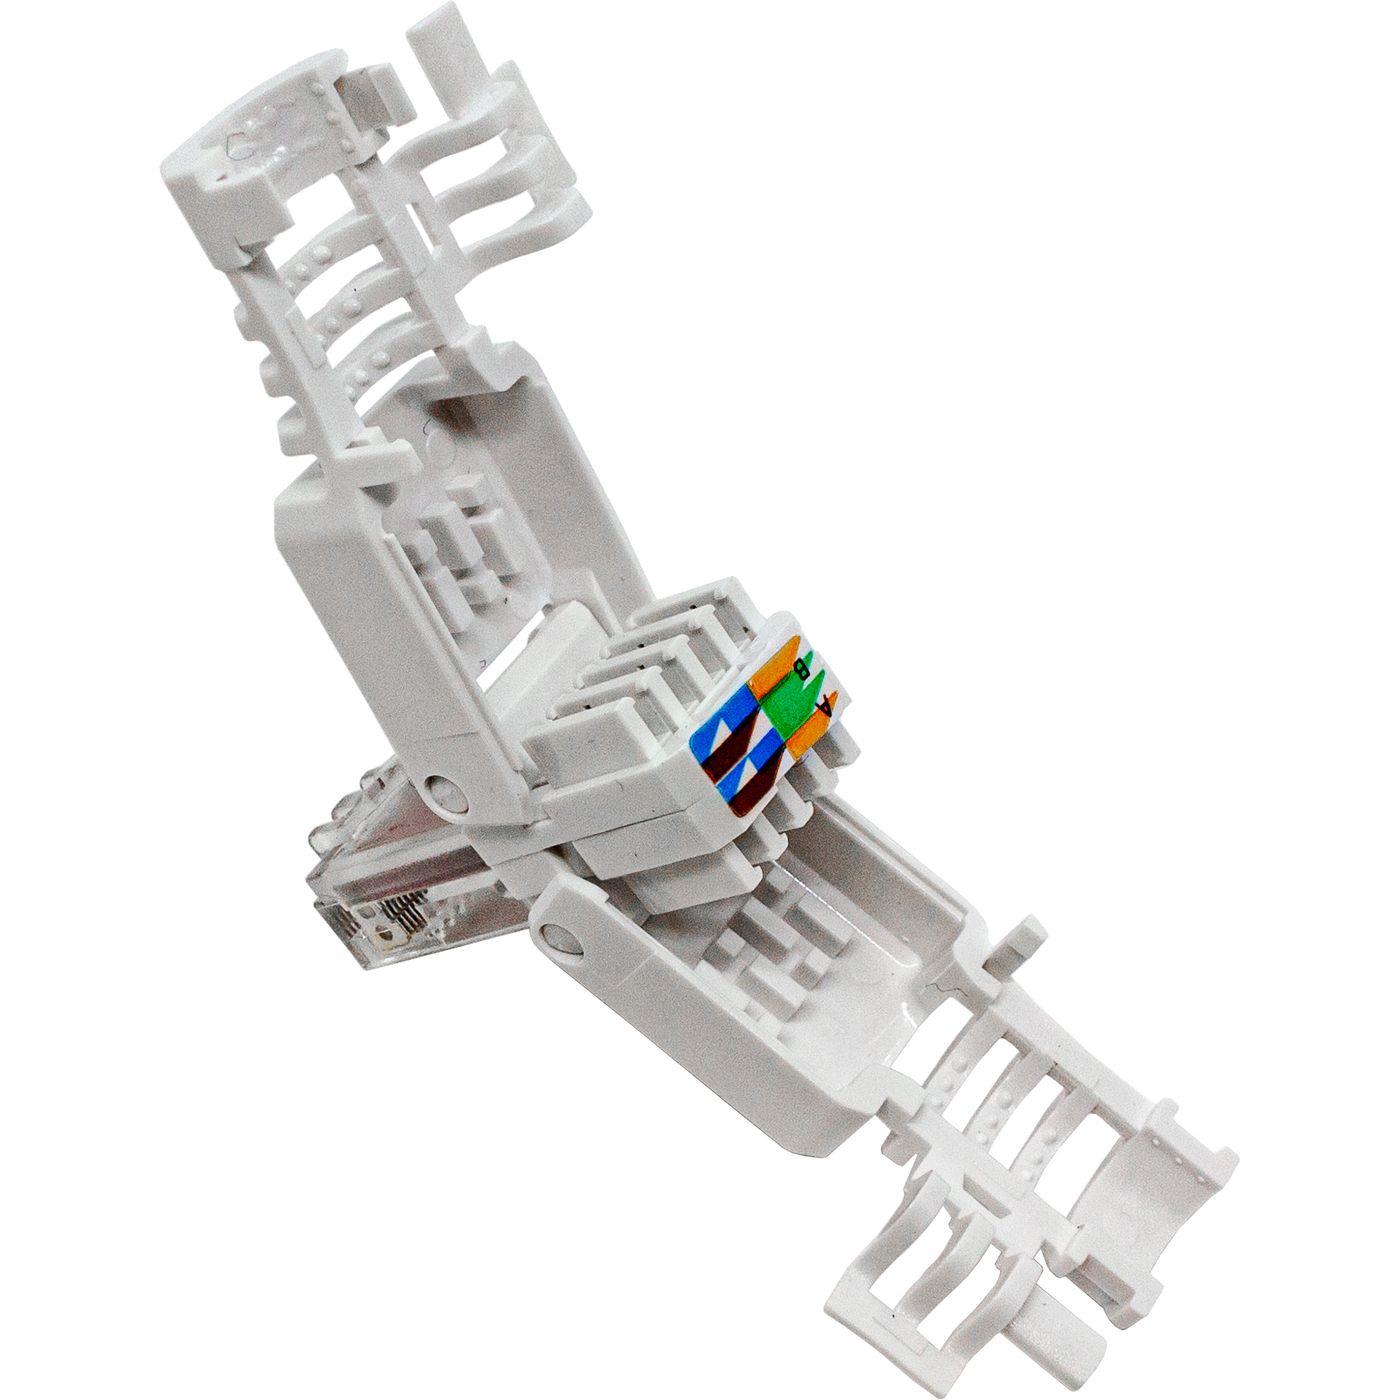 Network connector toolless RJ45 Plug CAT5 CAT6 LAN gold plated contacts Cat 6 Without tool Patch Cable